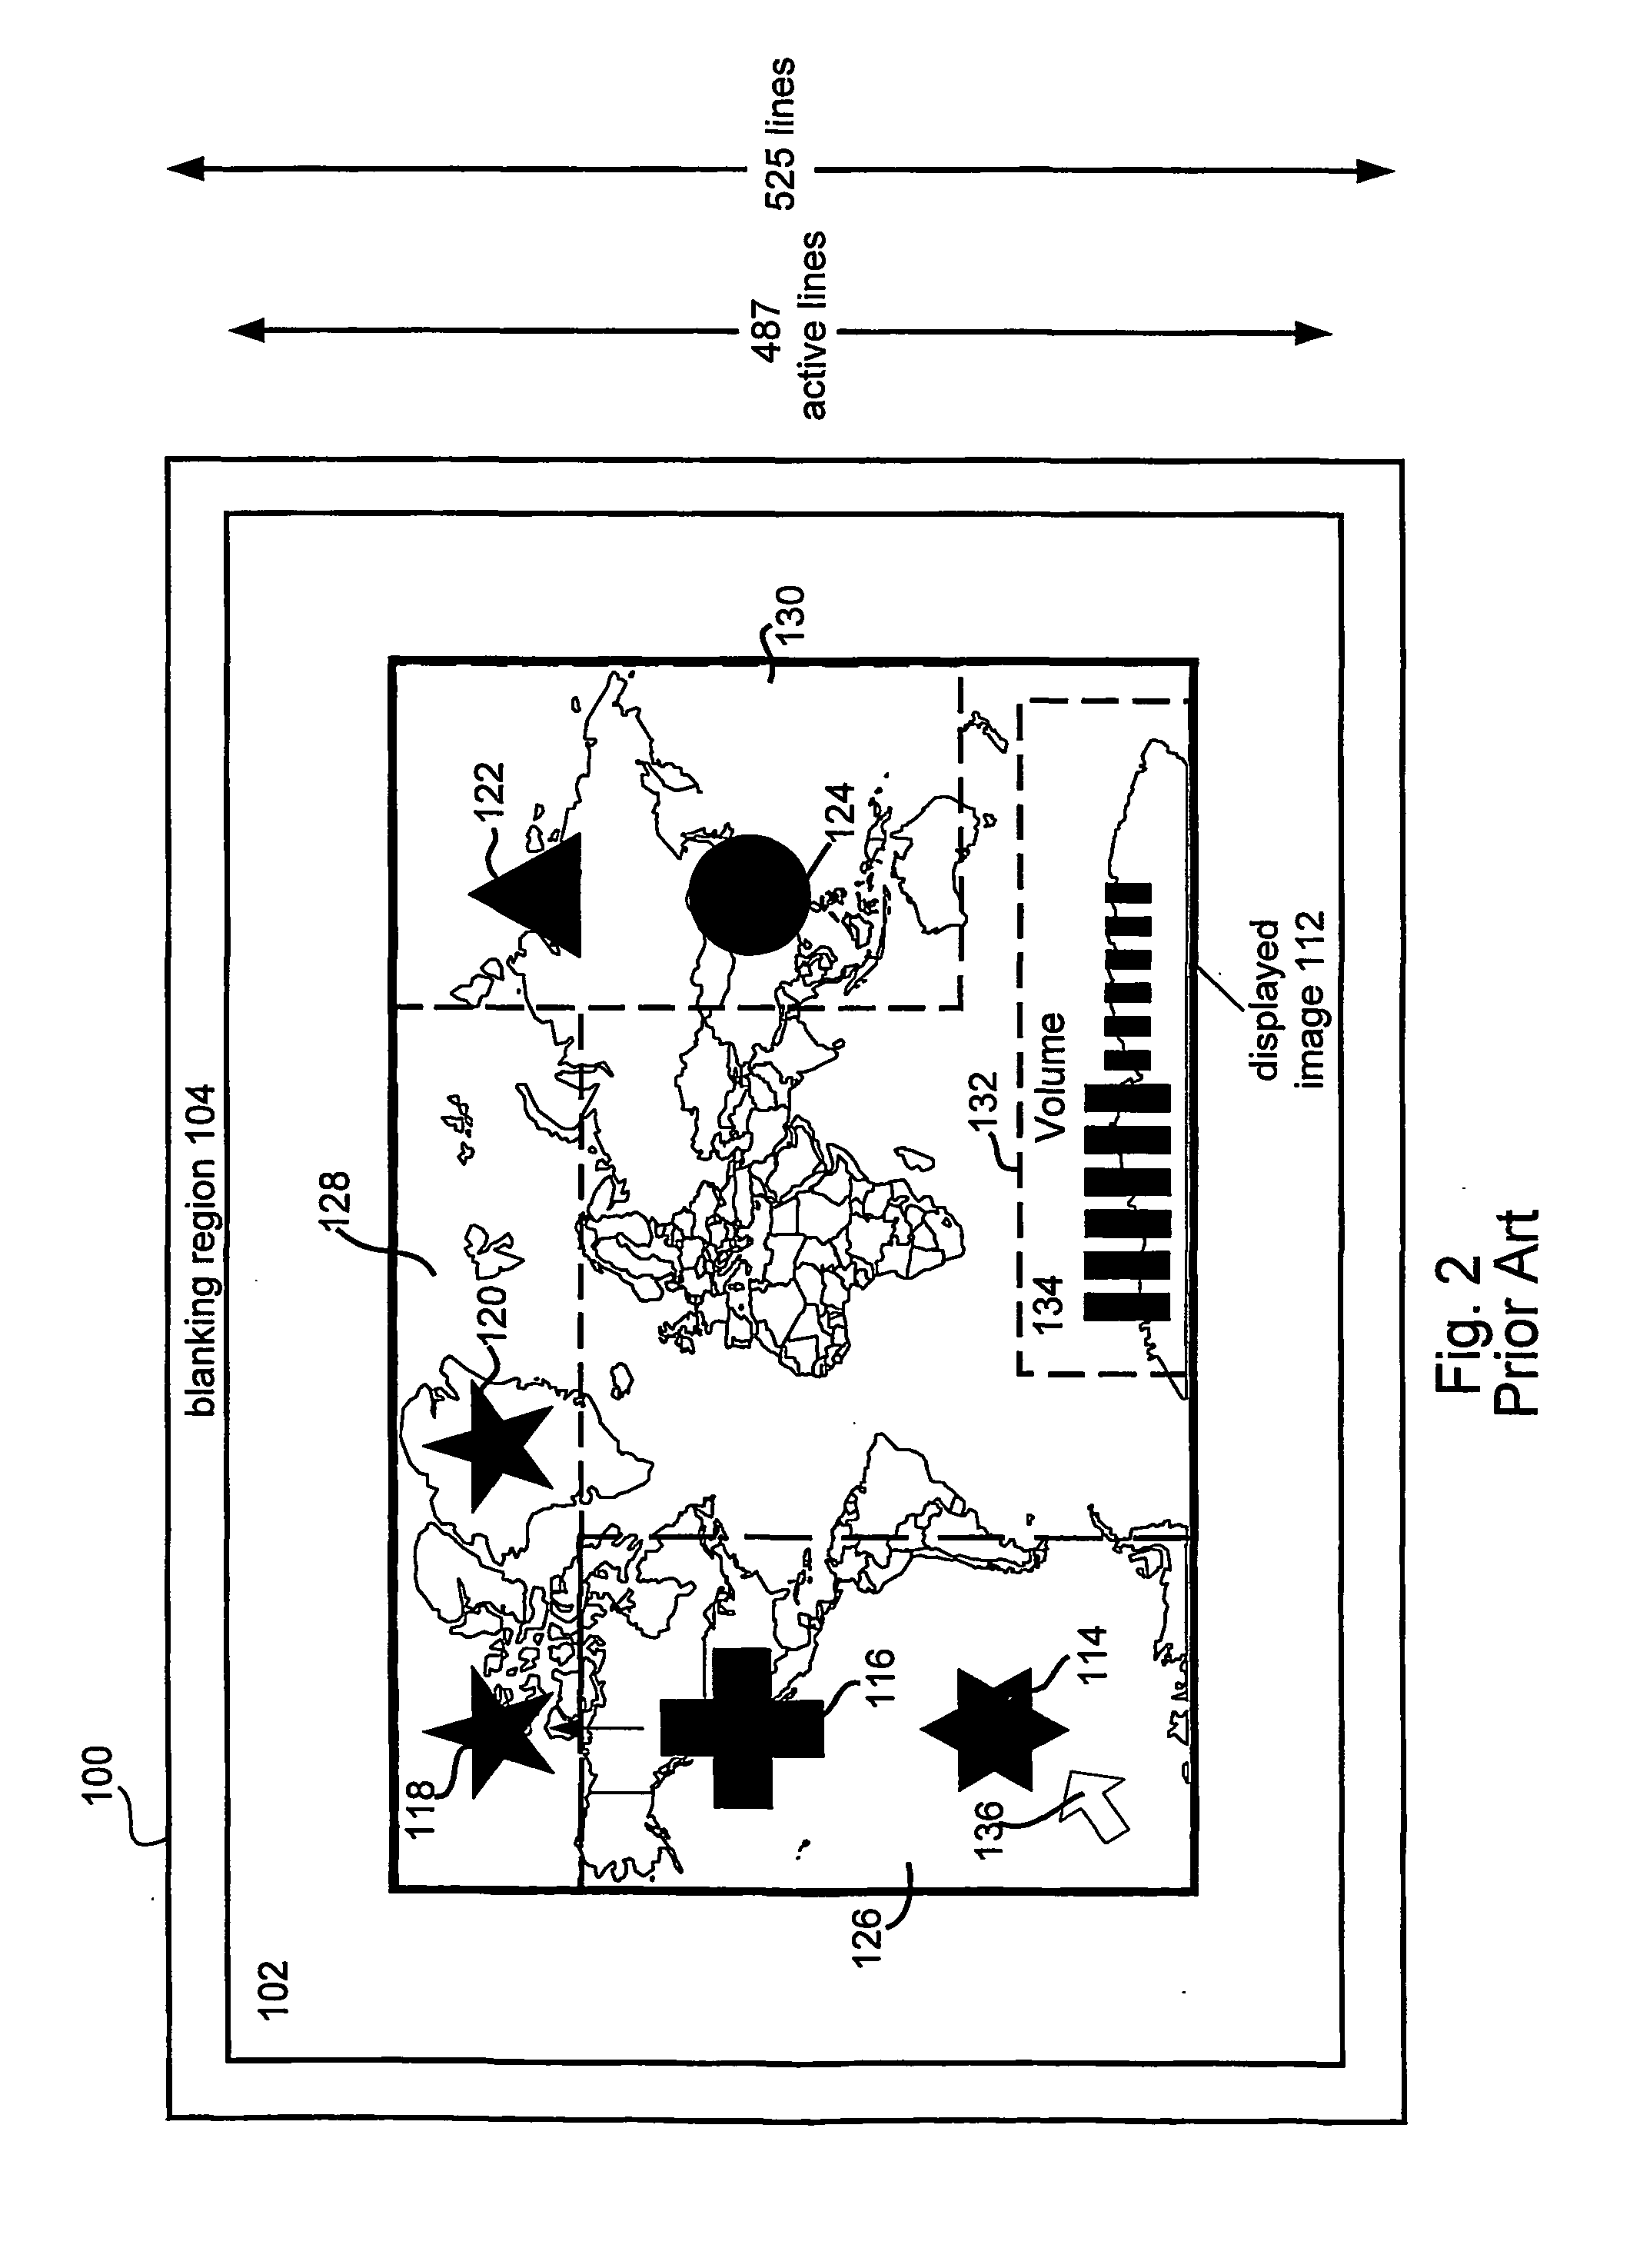 Method and system for image editing using a limited input device in a video environment